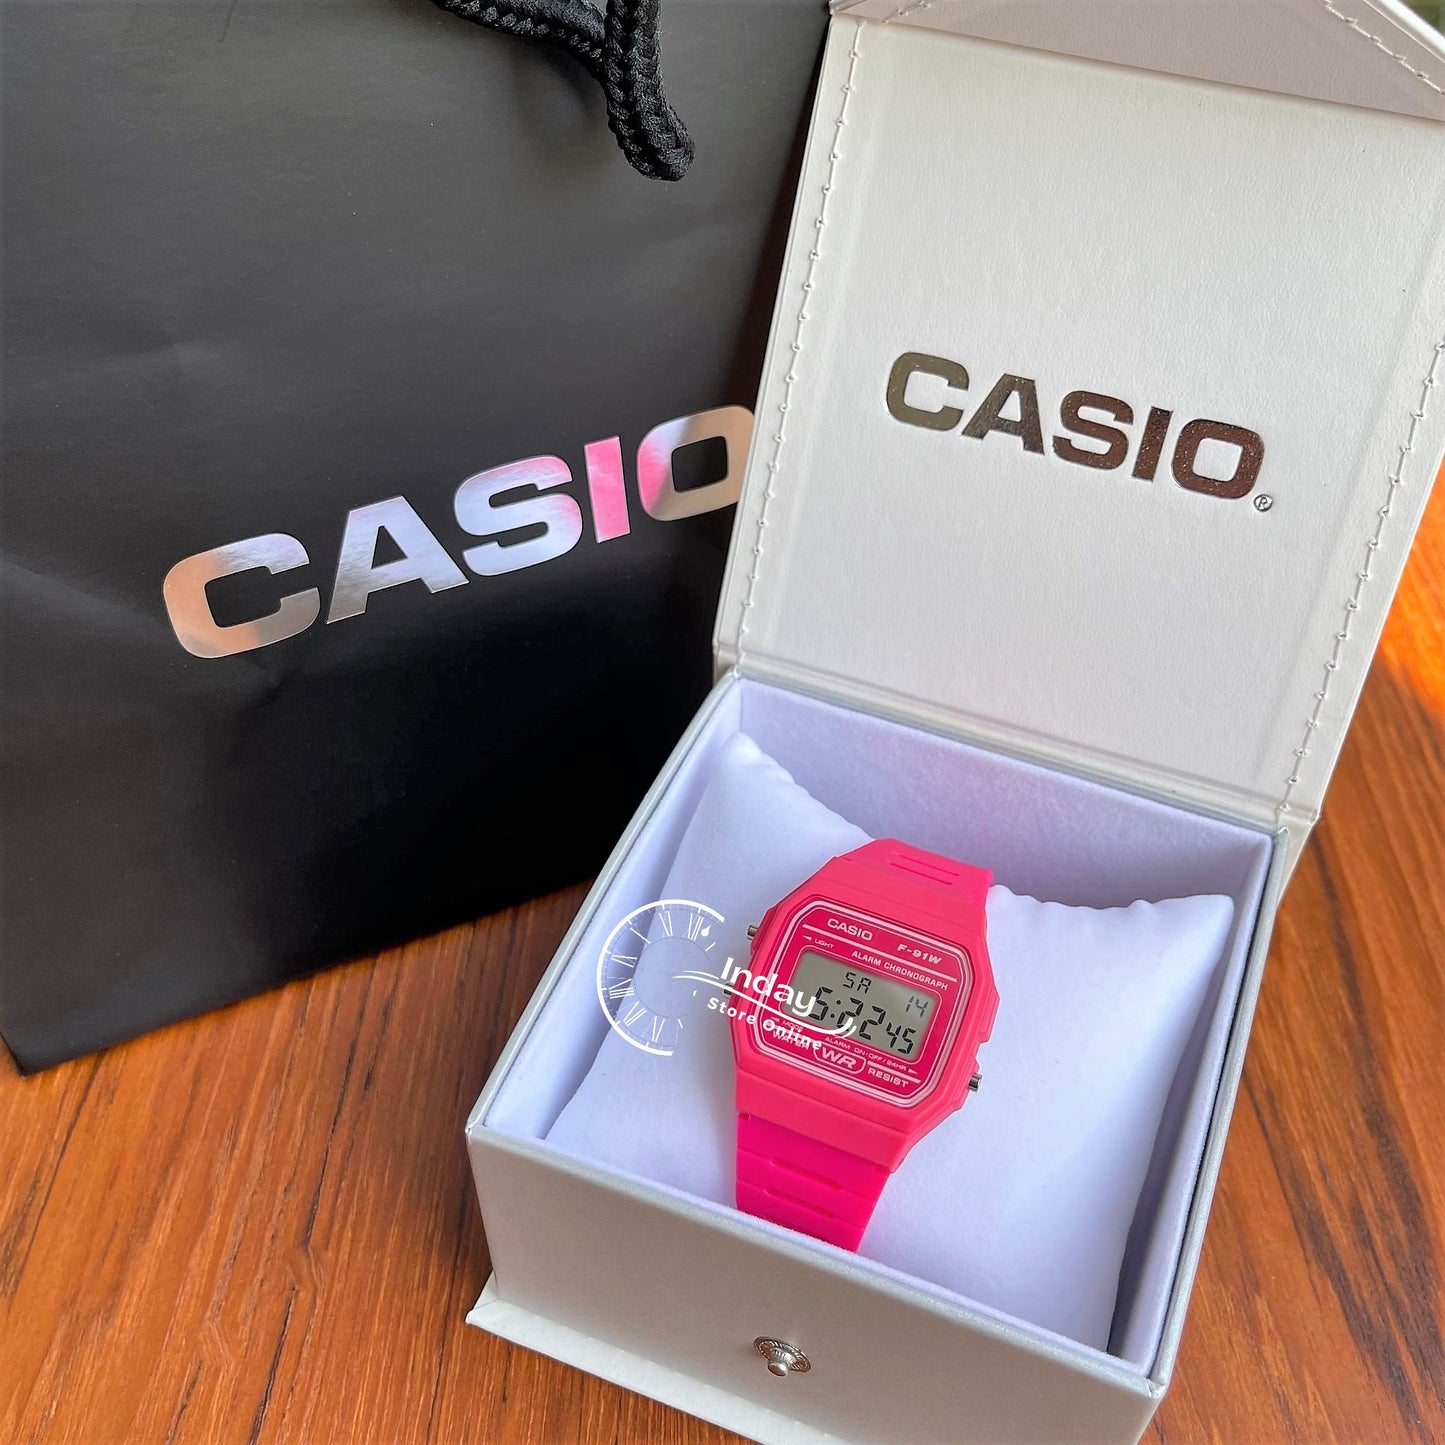 Casio Digital Women's Watch F-91WC-4A Pink Color Resin Strap